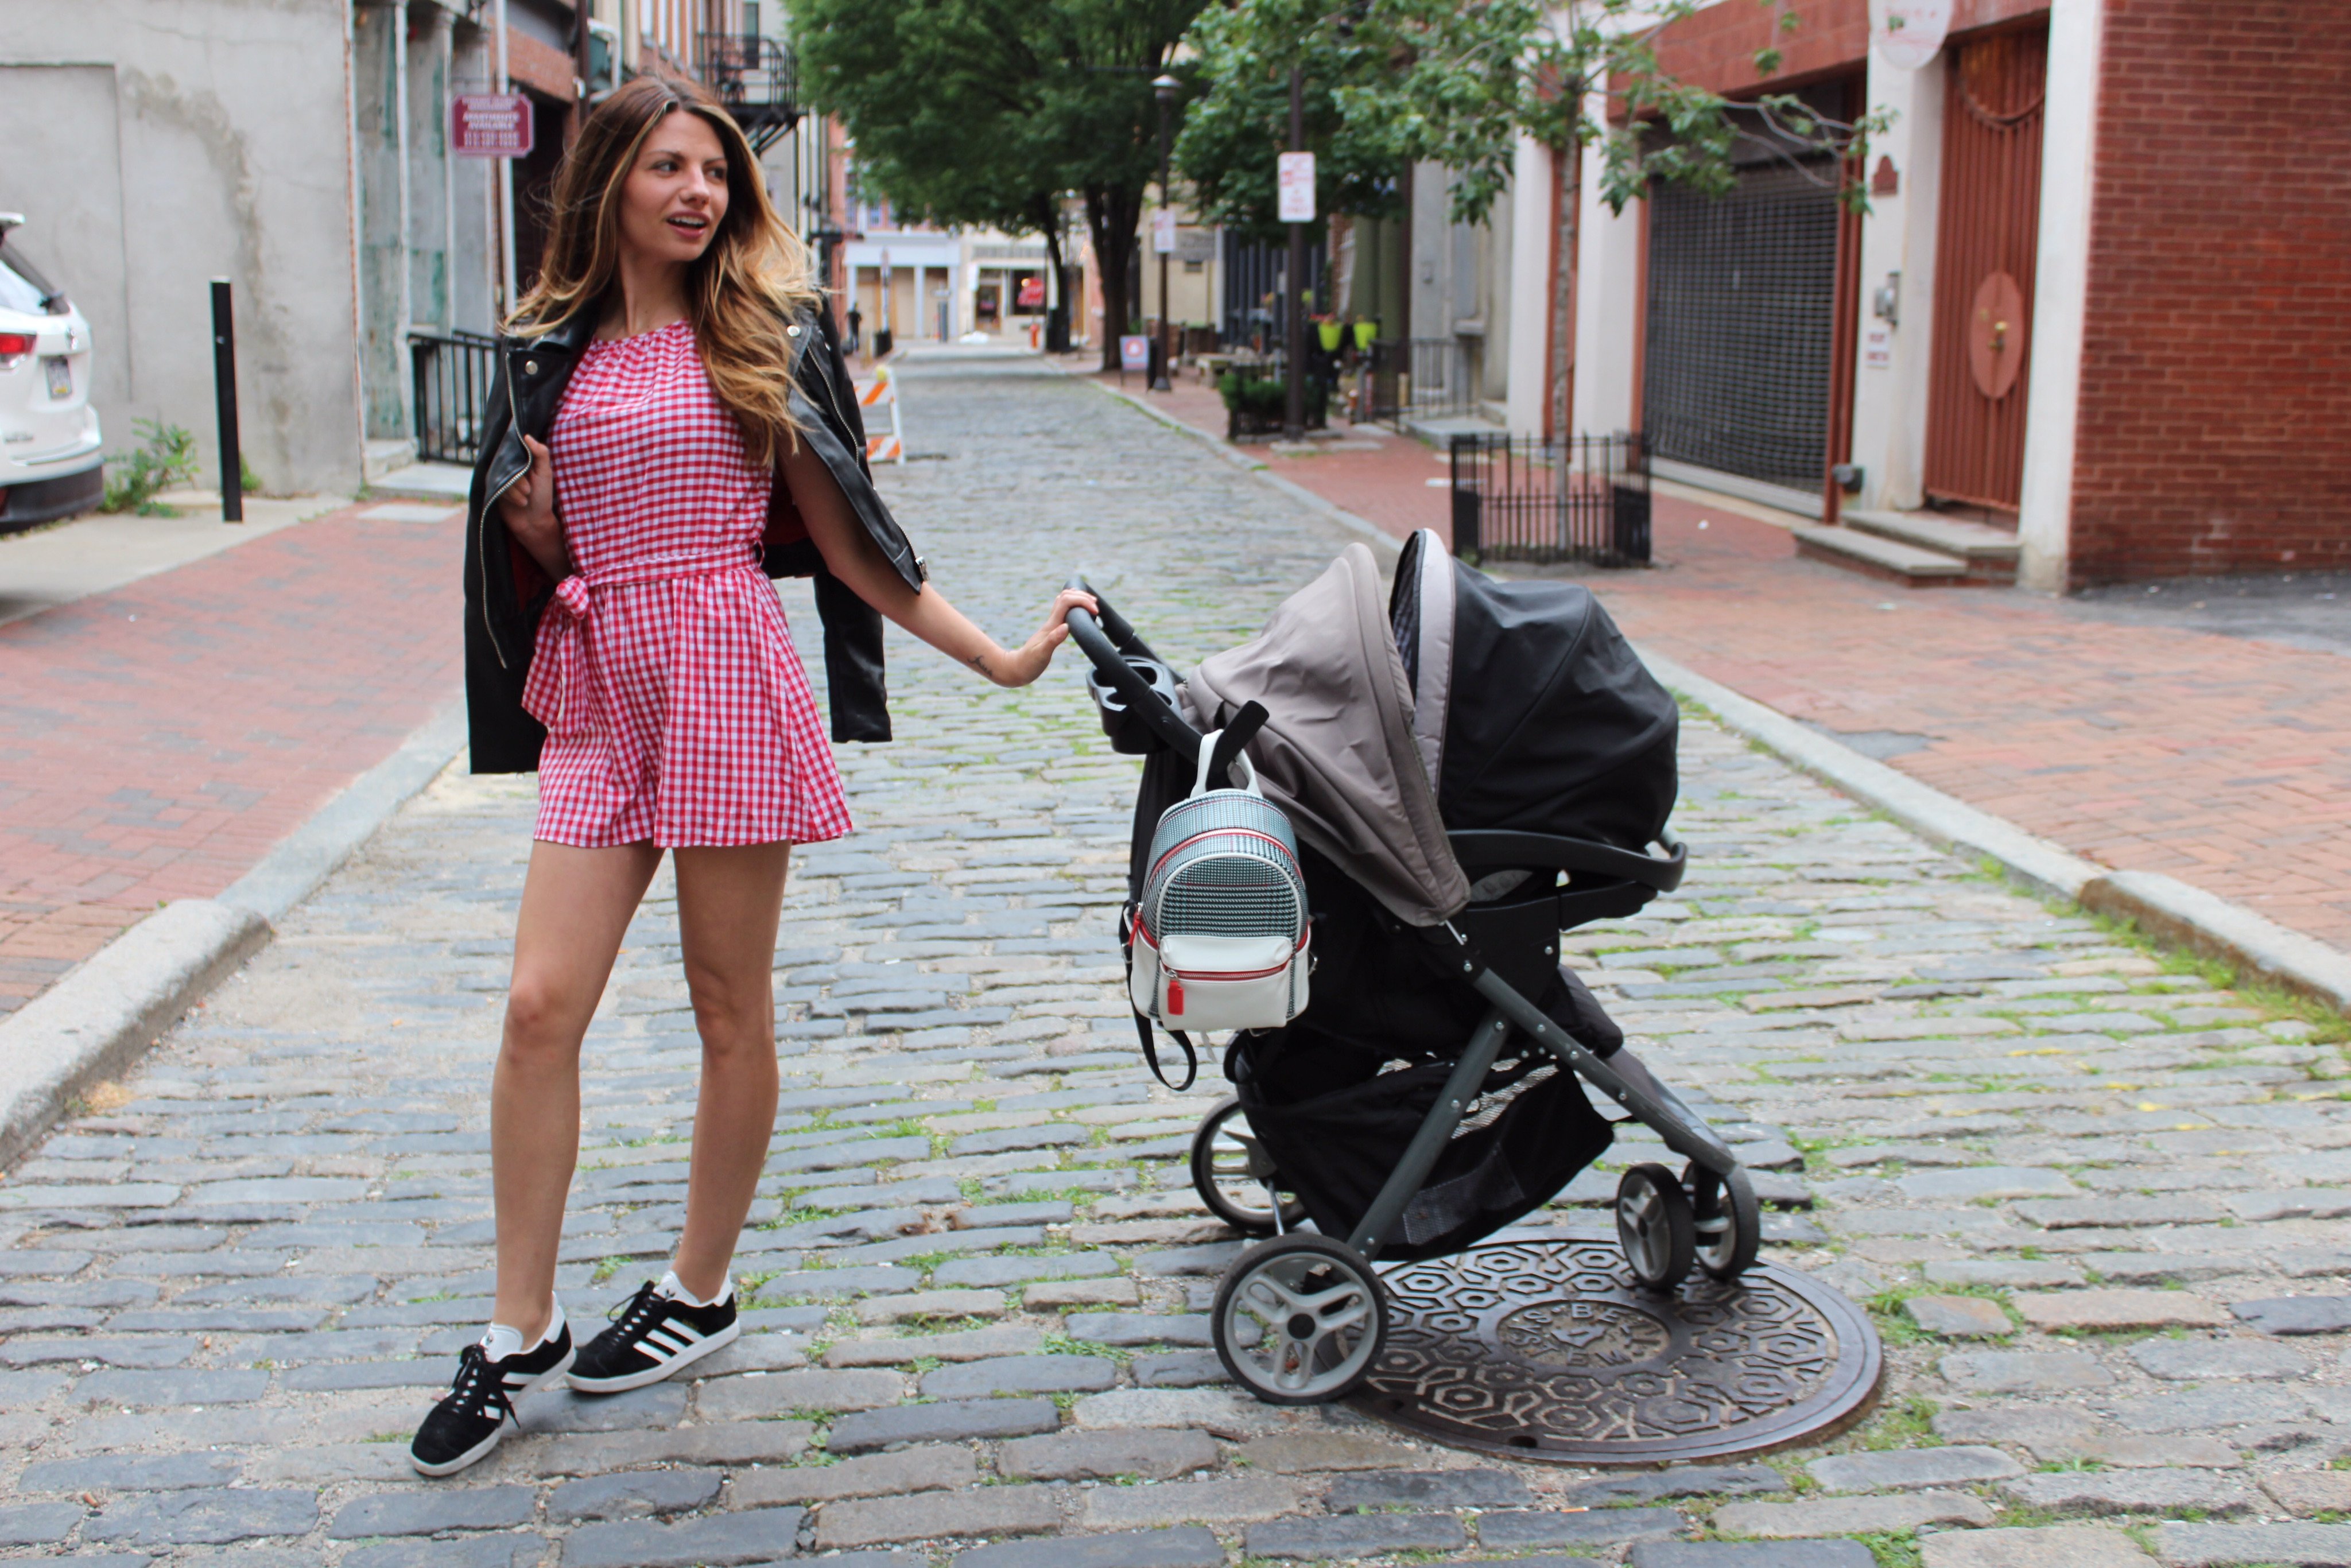 Lifestyle Blogger Chocolate and Lace shares what it's like raising kids in a city.